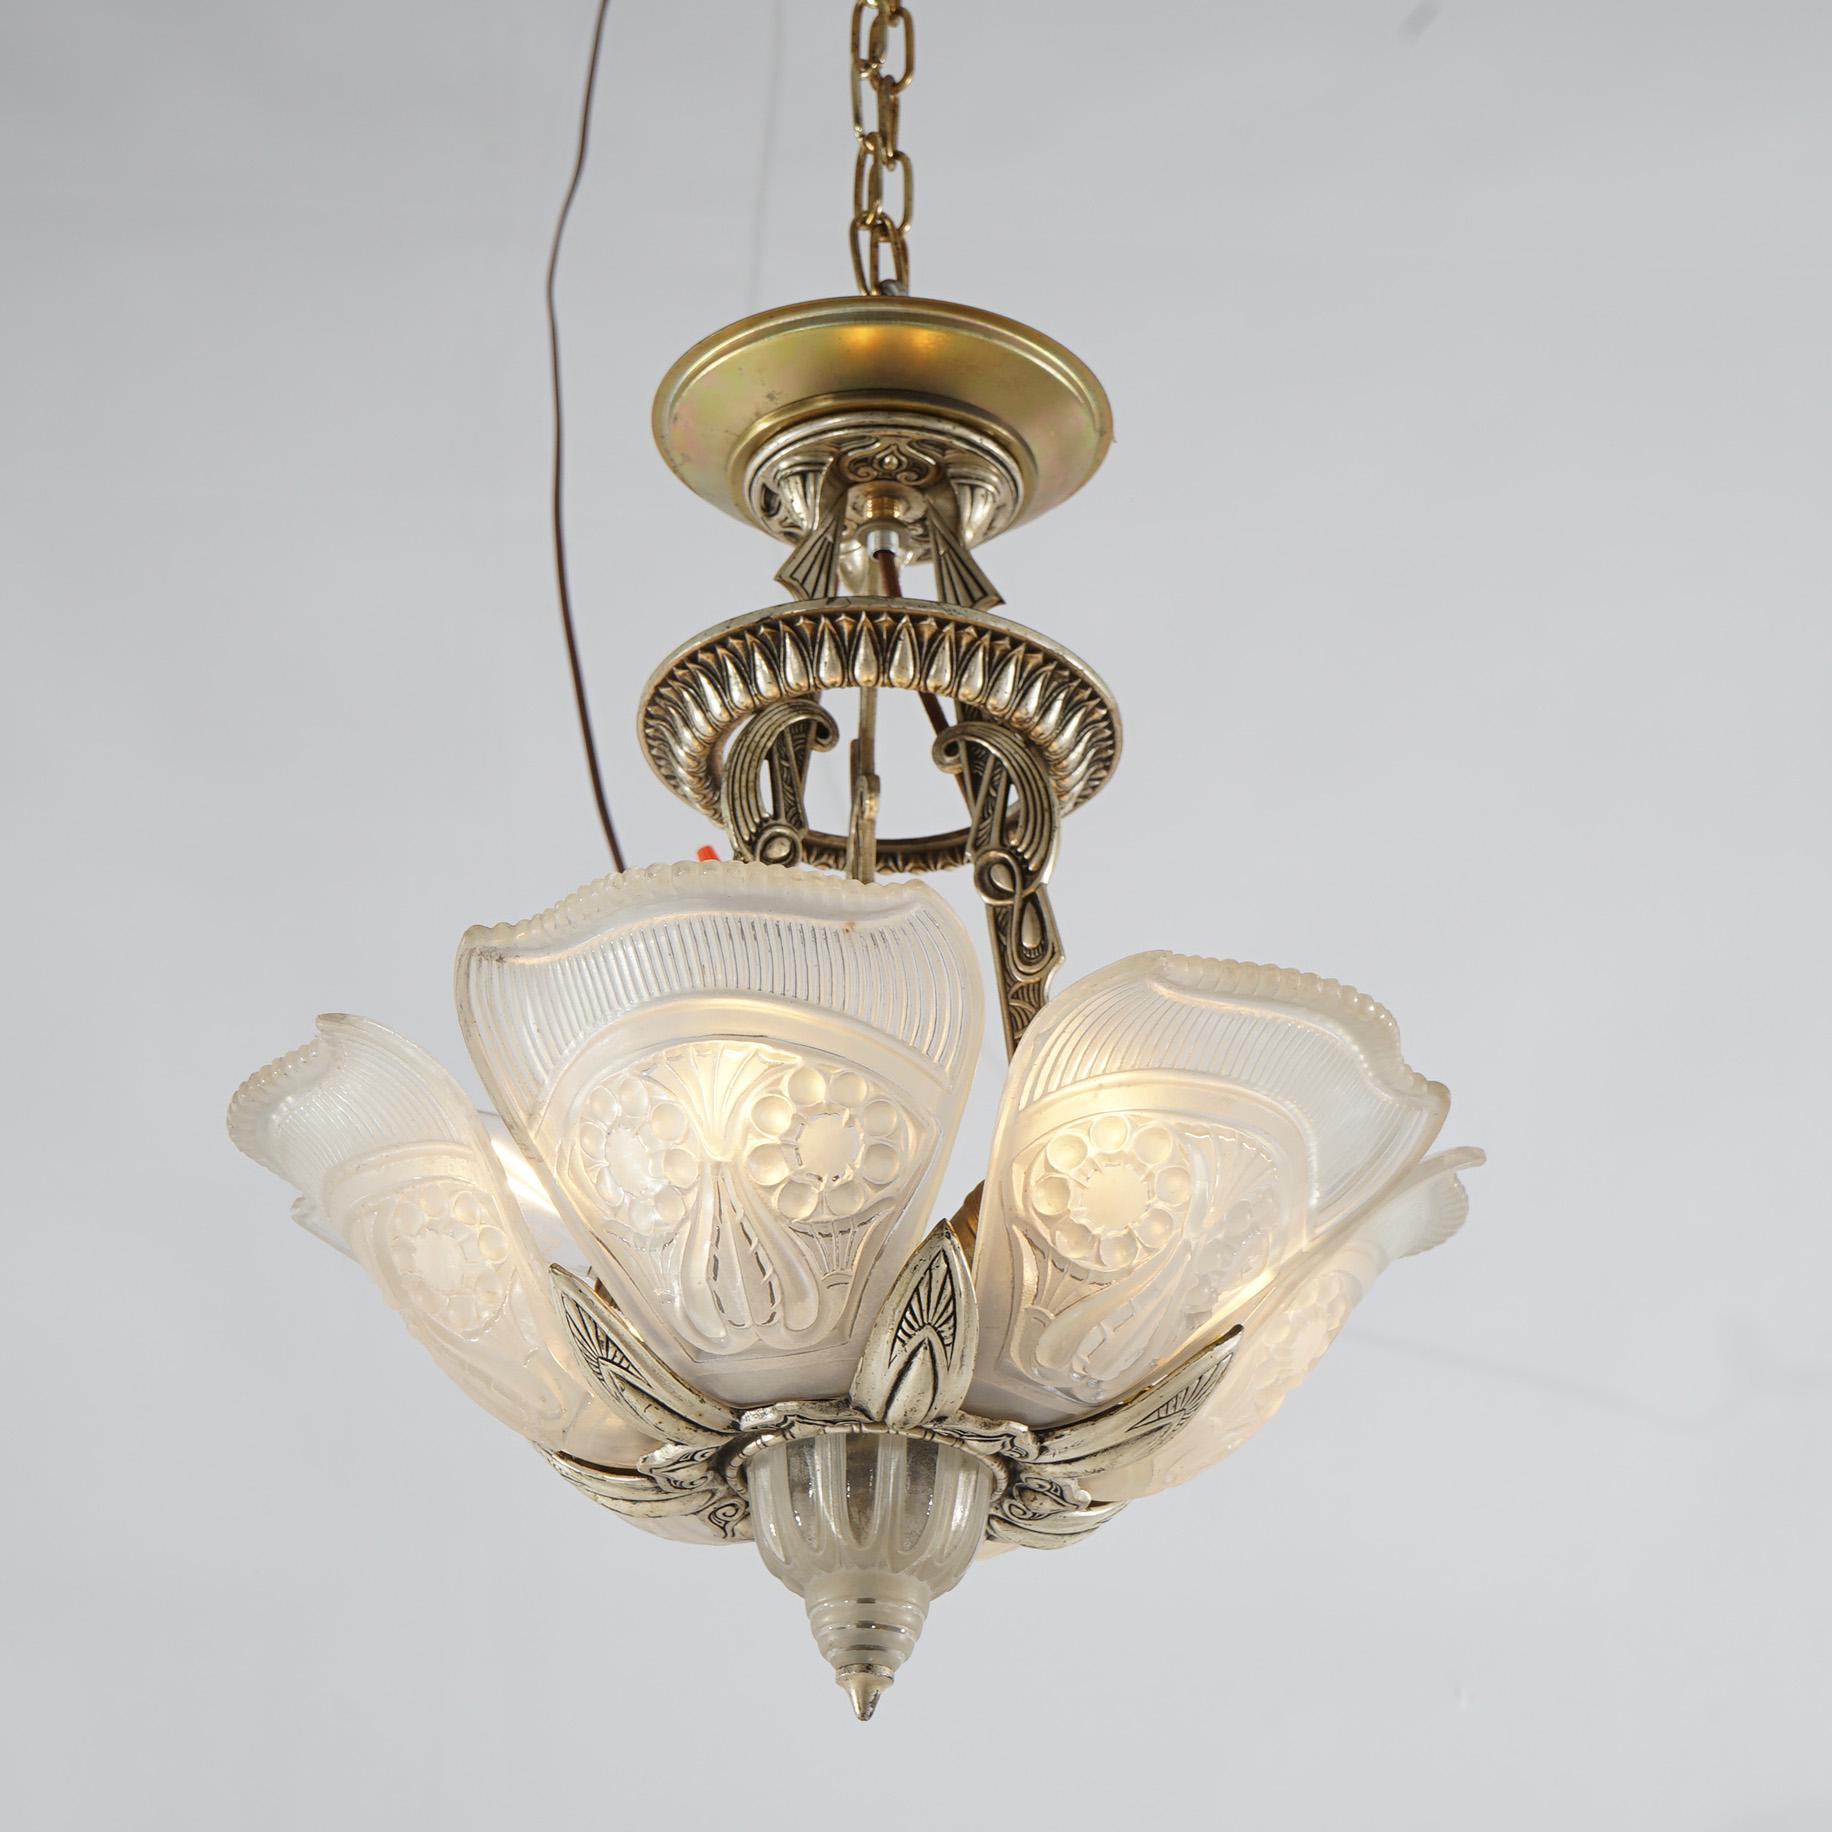 Metal Antique Art Deco Slip Shade Hanging Light with Opalescent Pressed Glass Shades